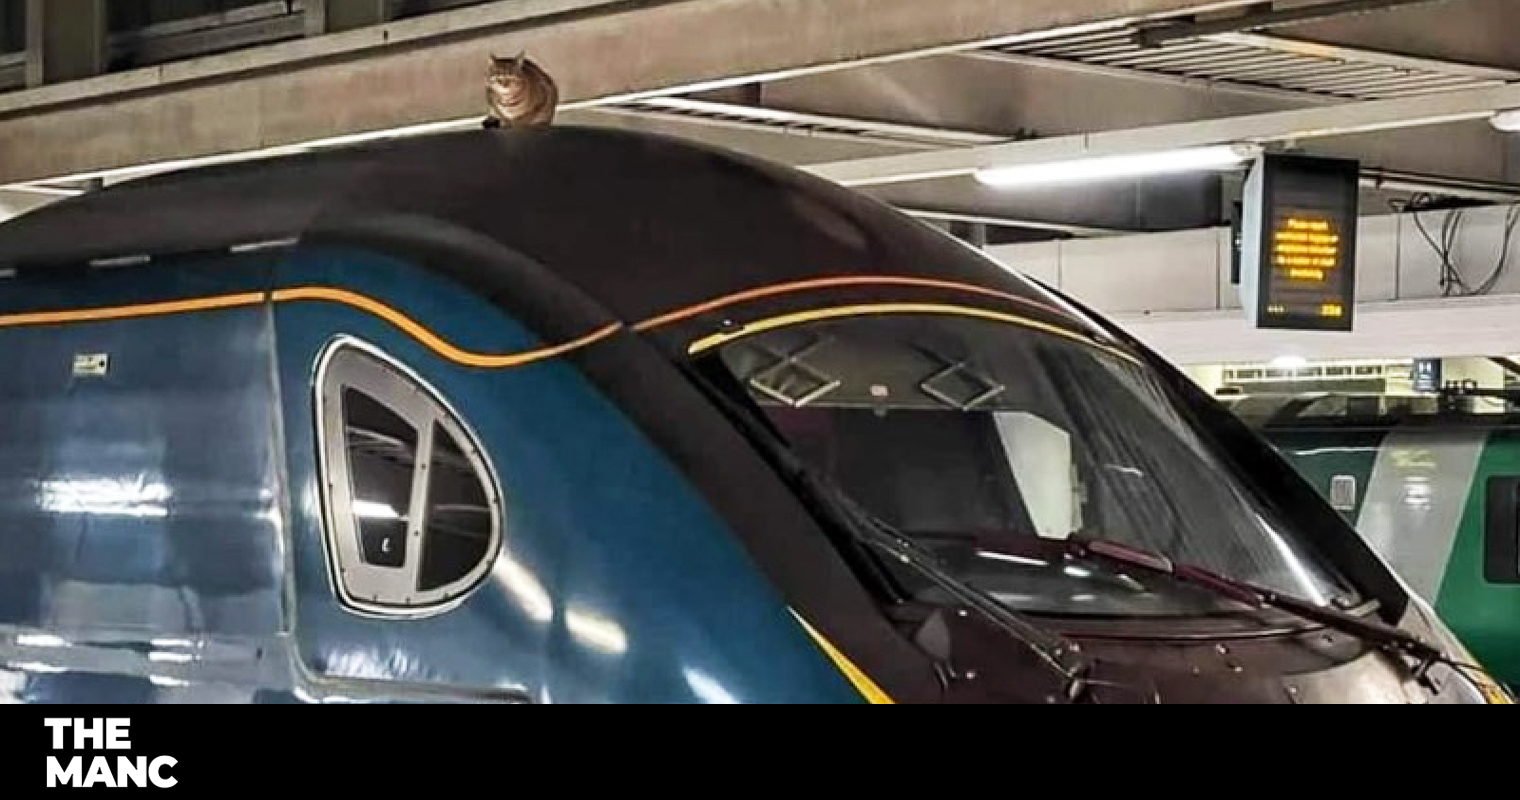 London cat attempts to hitch ride to Manchester on top of Pendolino train, The Manc